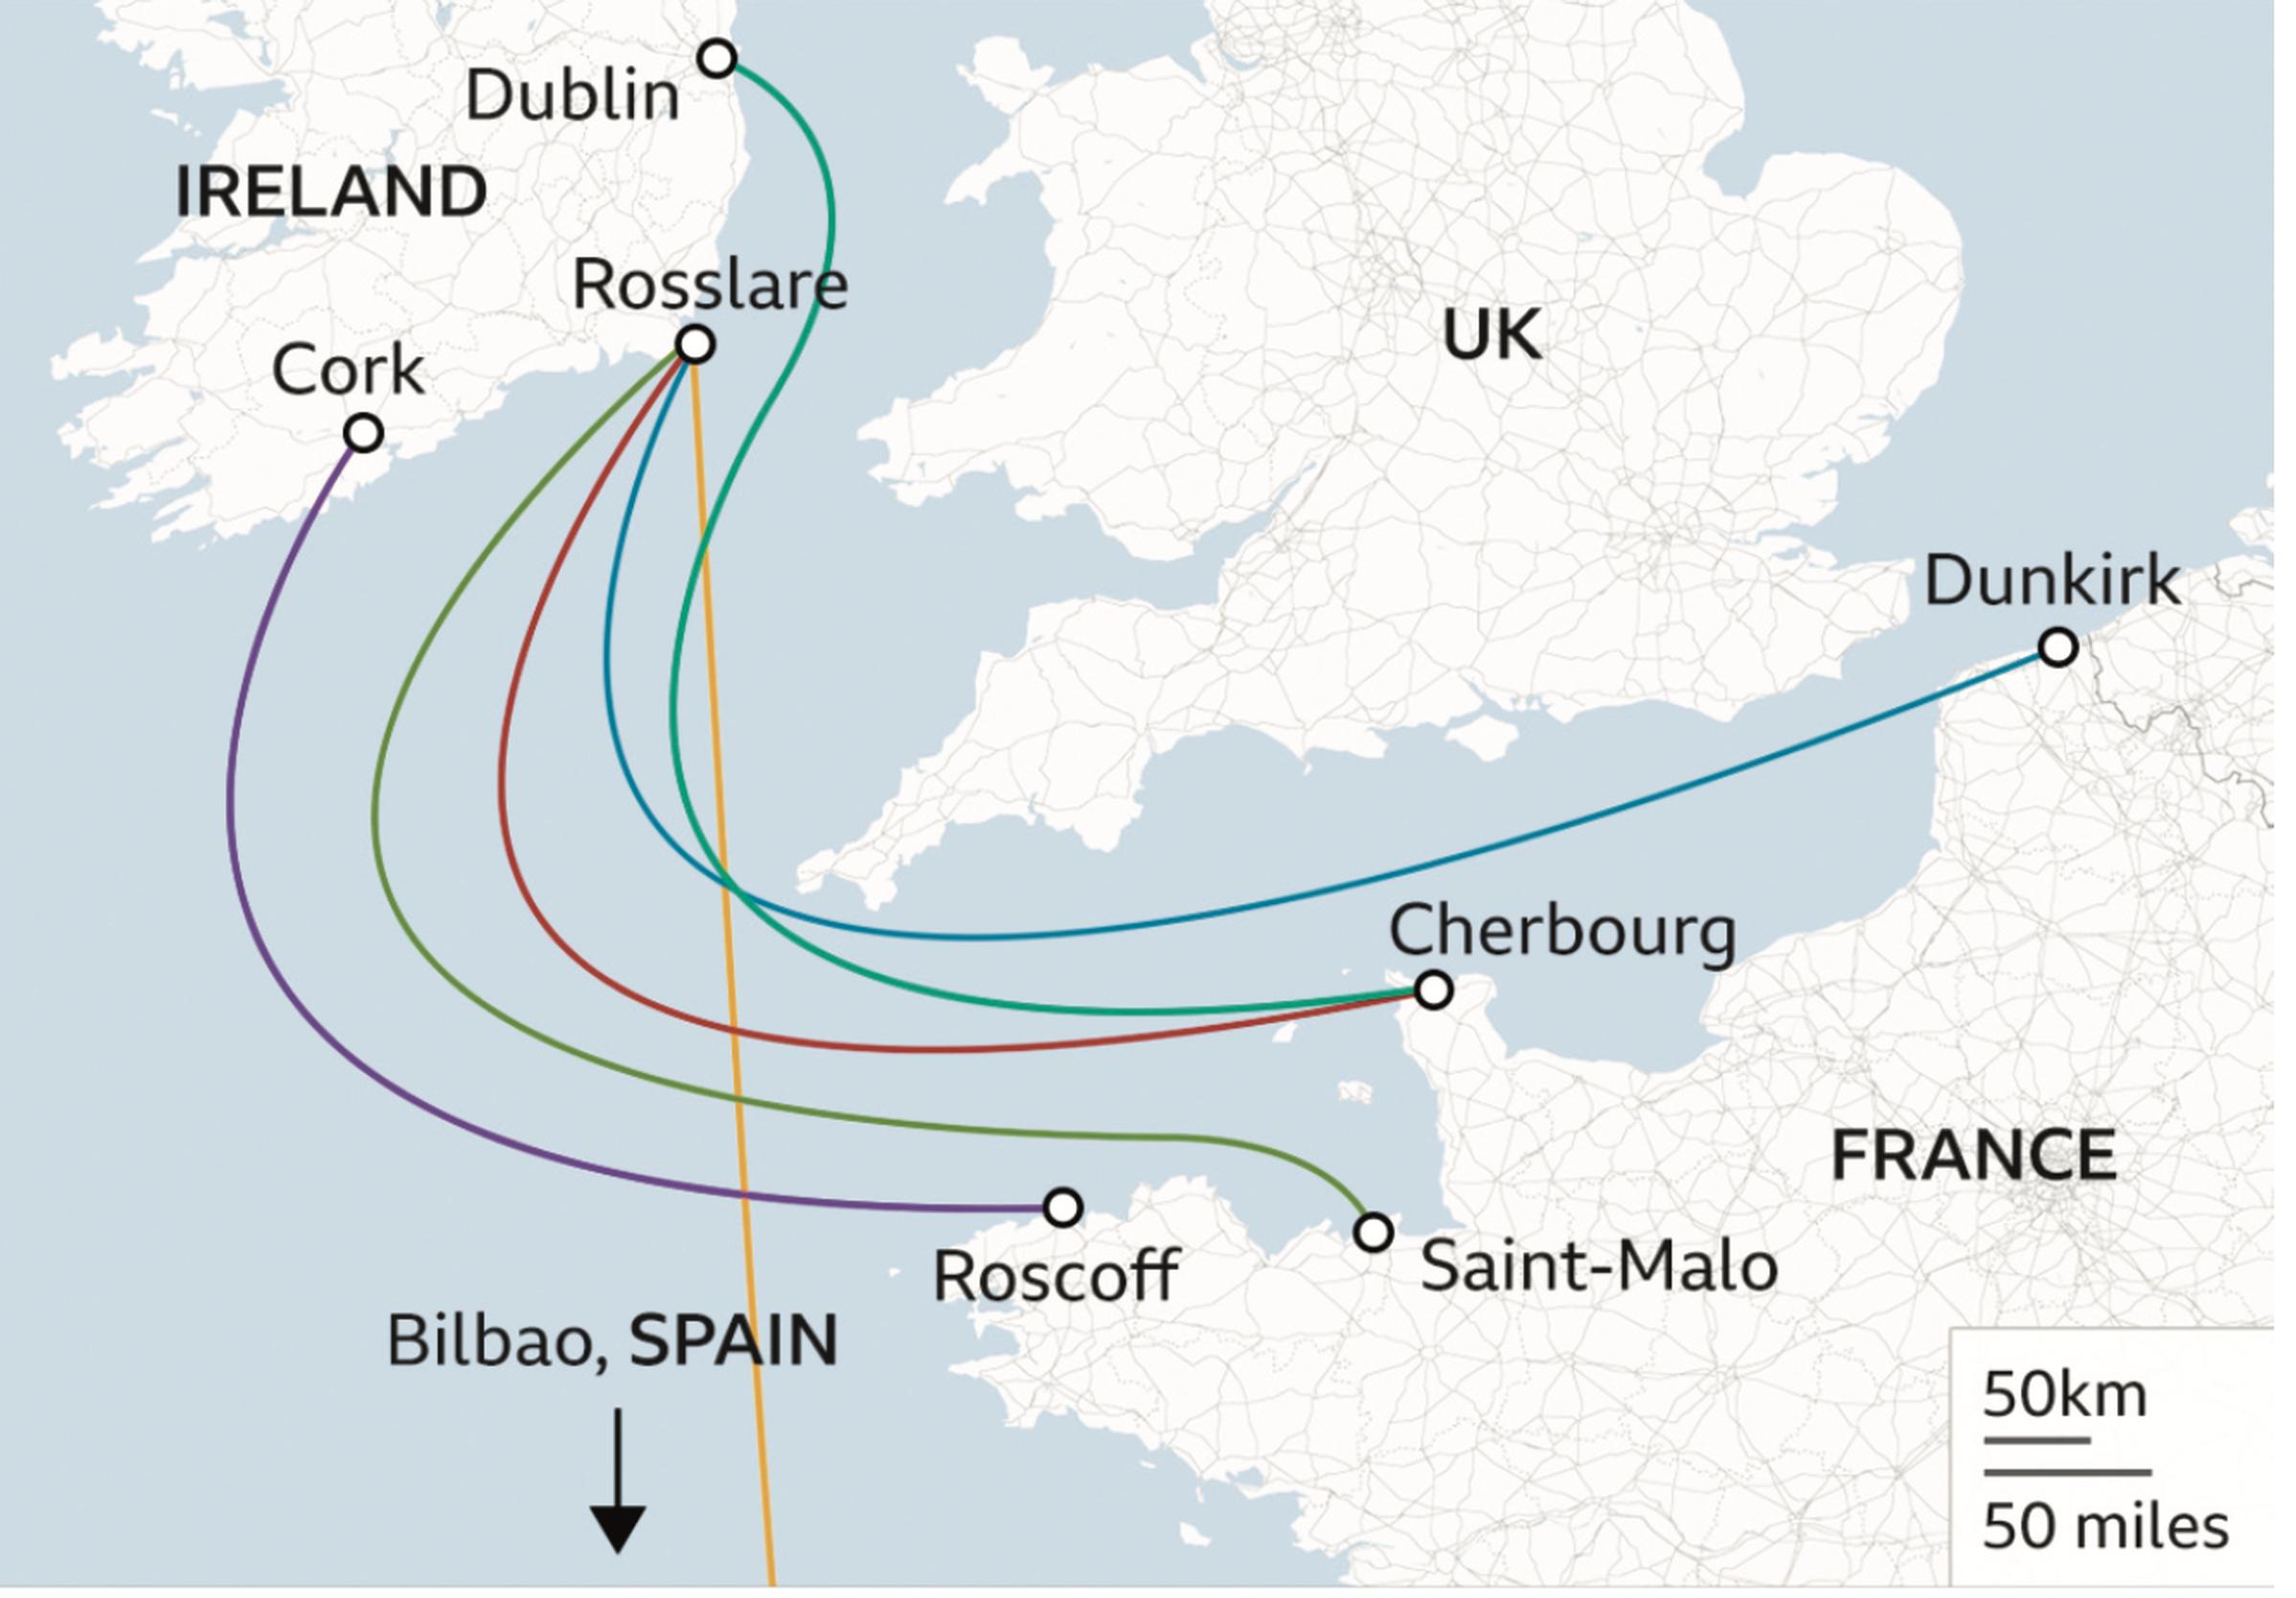 New ferry routes, connecting ports in Ireland to ports in Portugal, Spain, France, Netherlands, Belgium and Germany, as a substitute for the ‘land-bridge’ through the UK. There are obvious non-trivial implications for ports, road traffic and services in Wales and England. Image © BBC